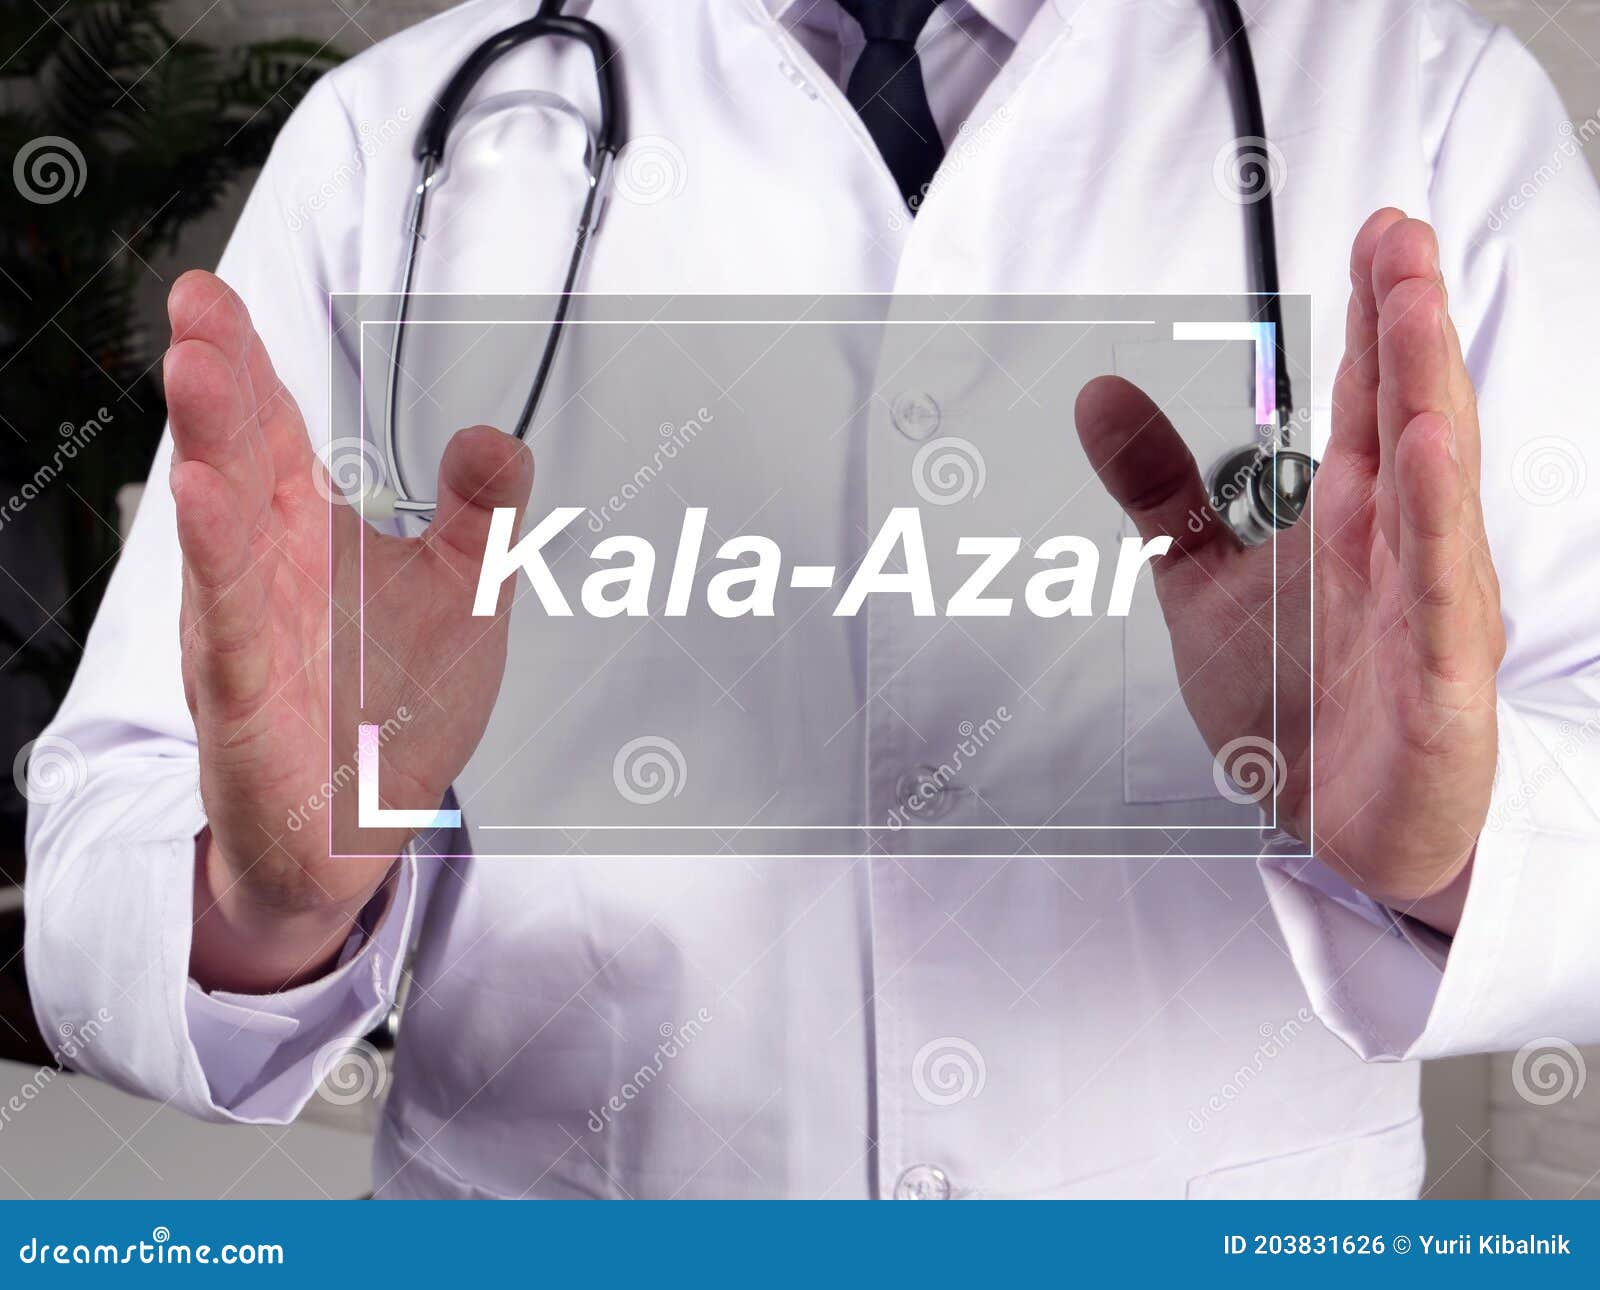 health care concept about kala-azar  with inscription on the page